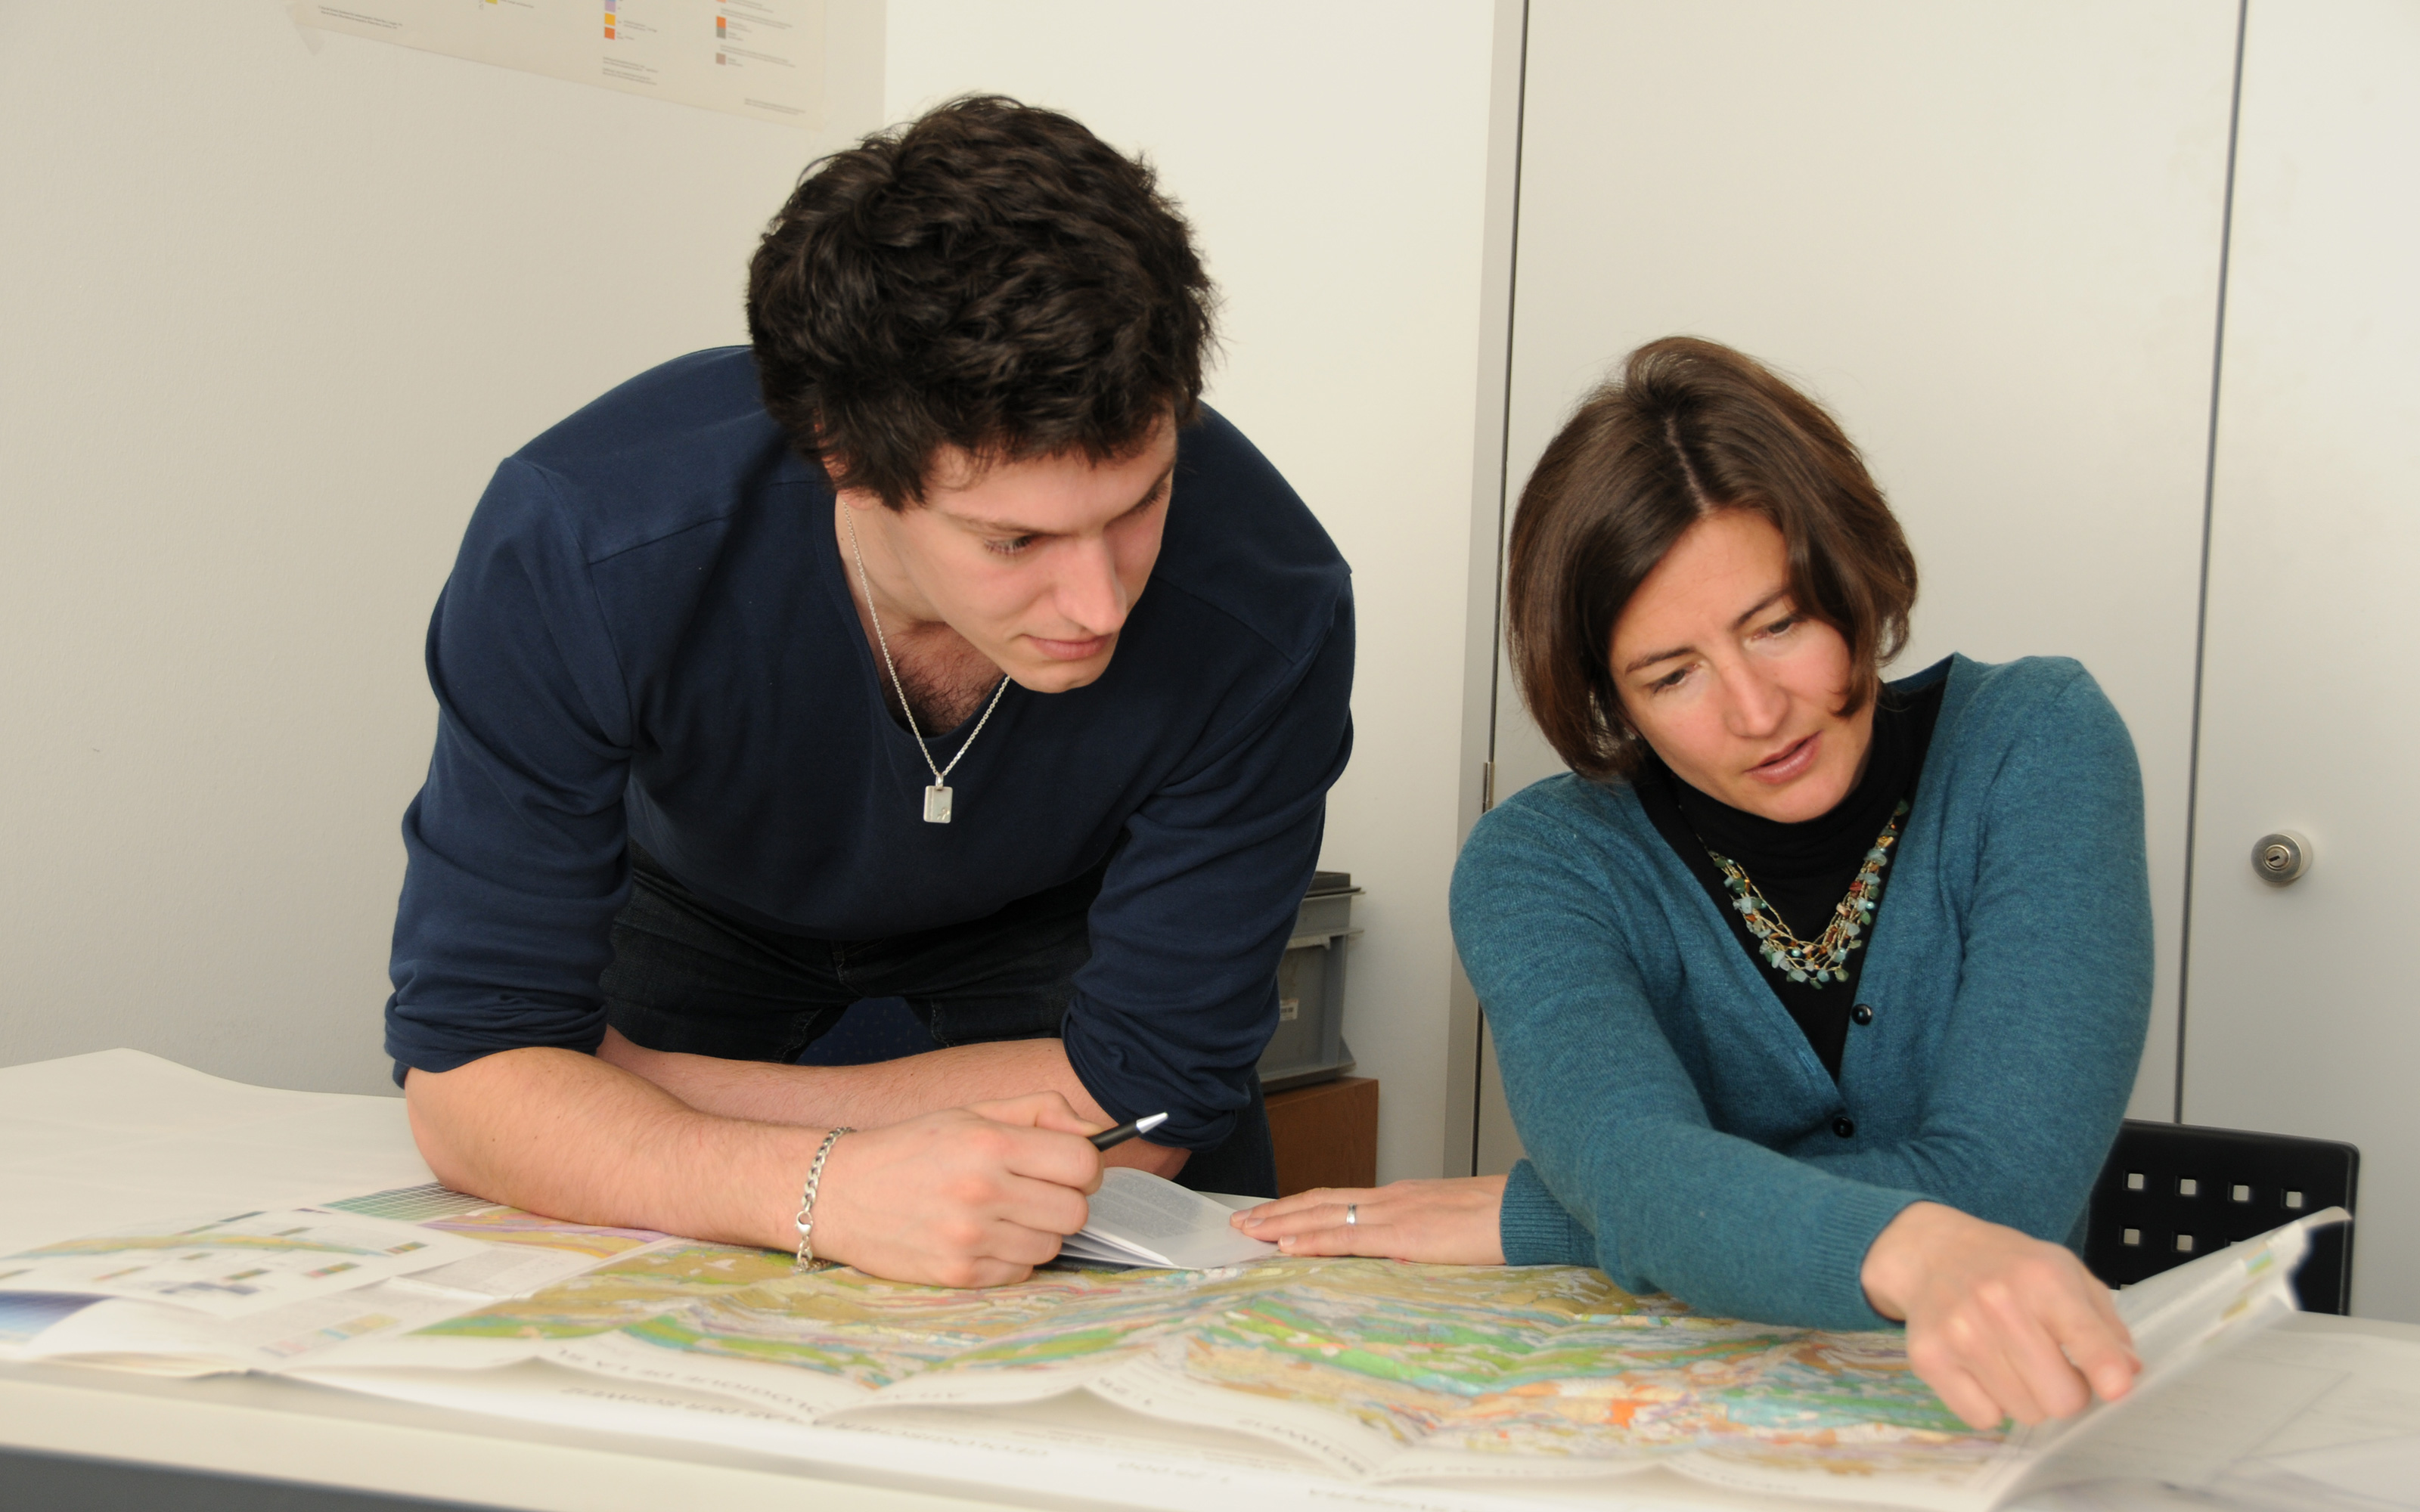 A graduate intern studies a geological map together with his supervisor